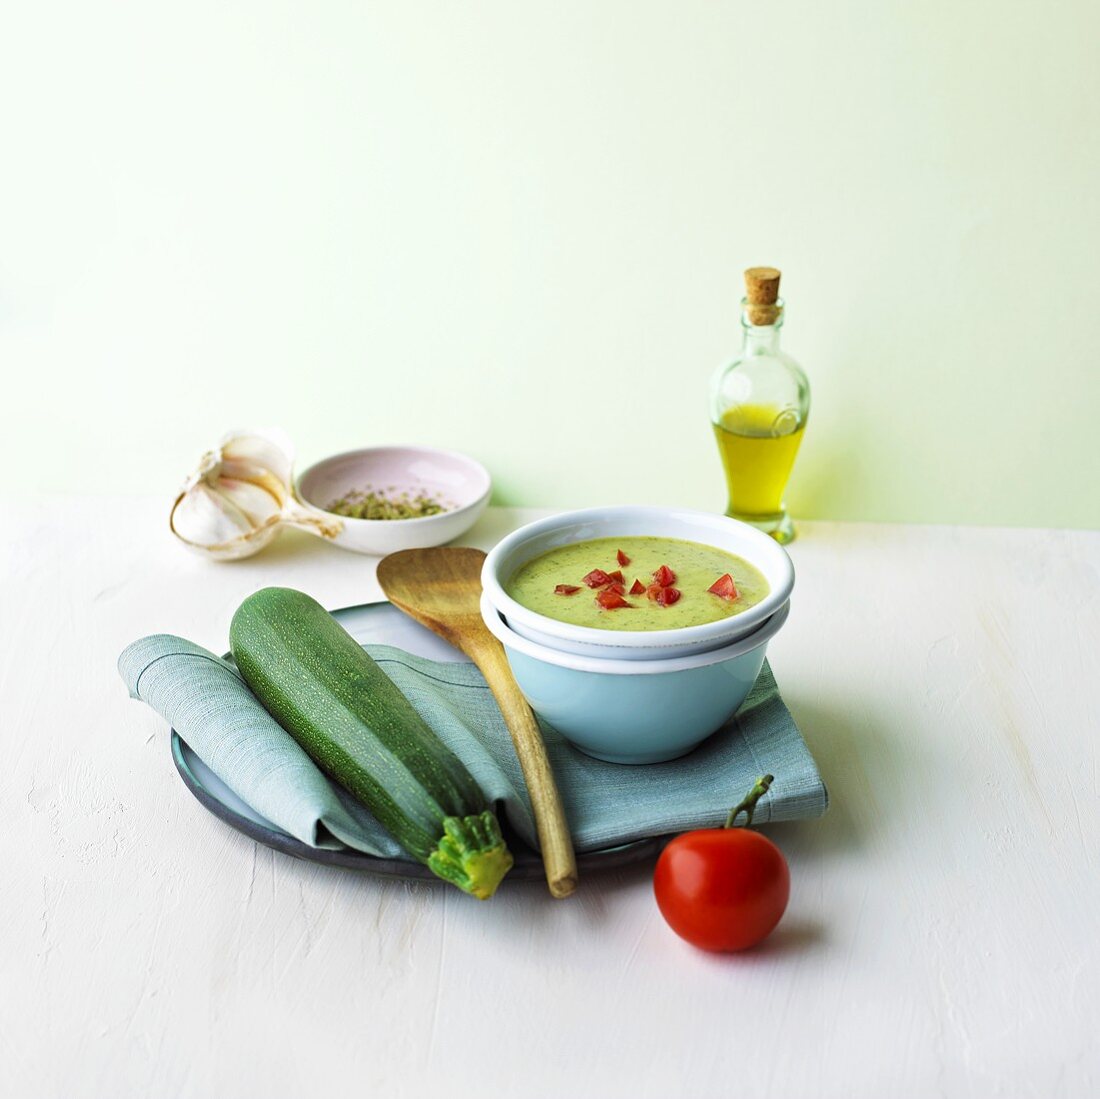 Courgette soup with tomatoes